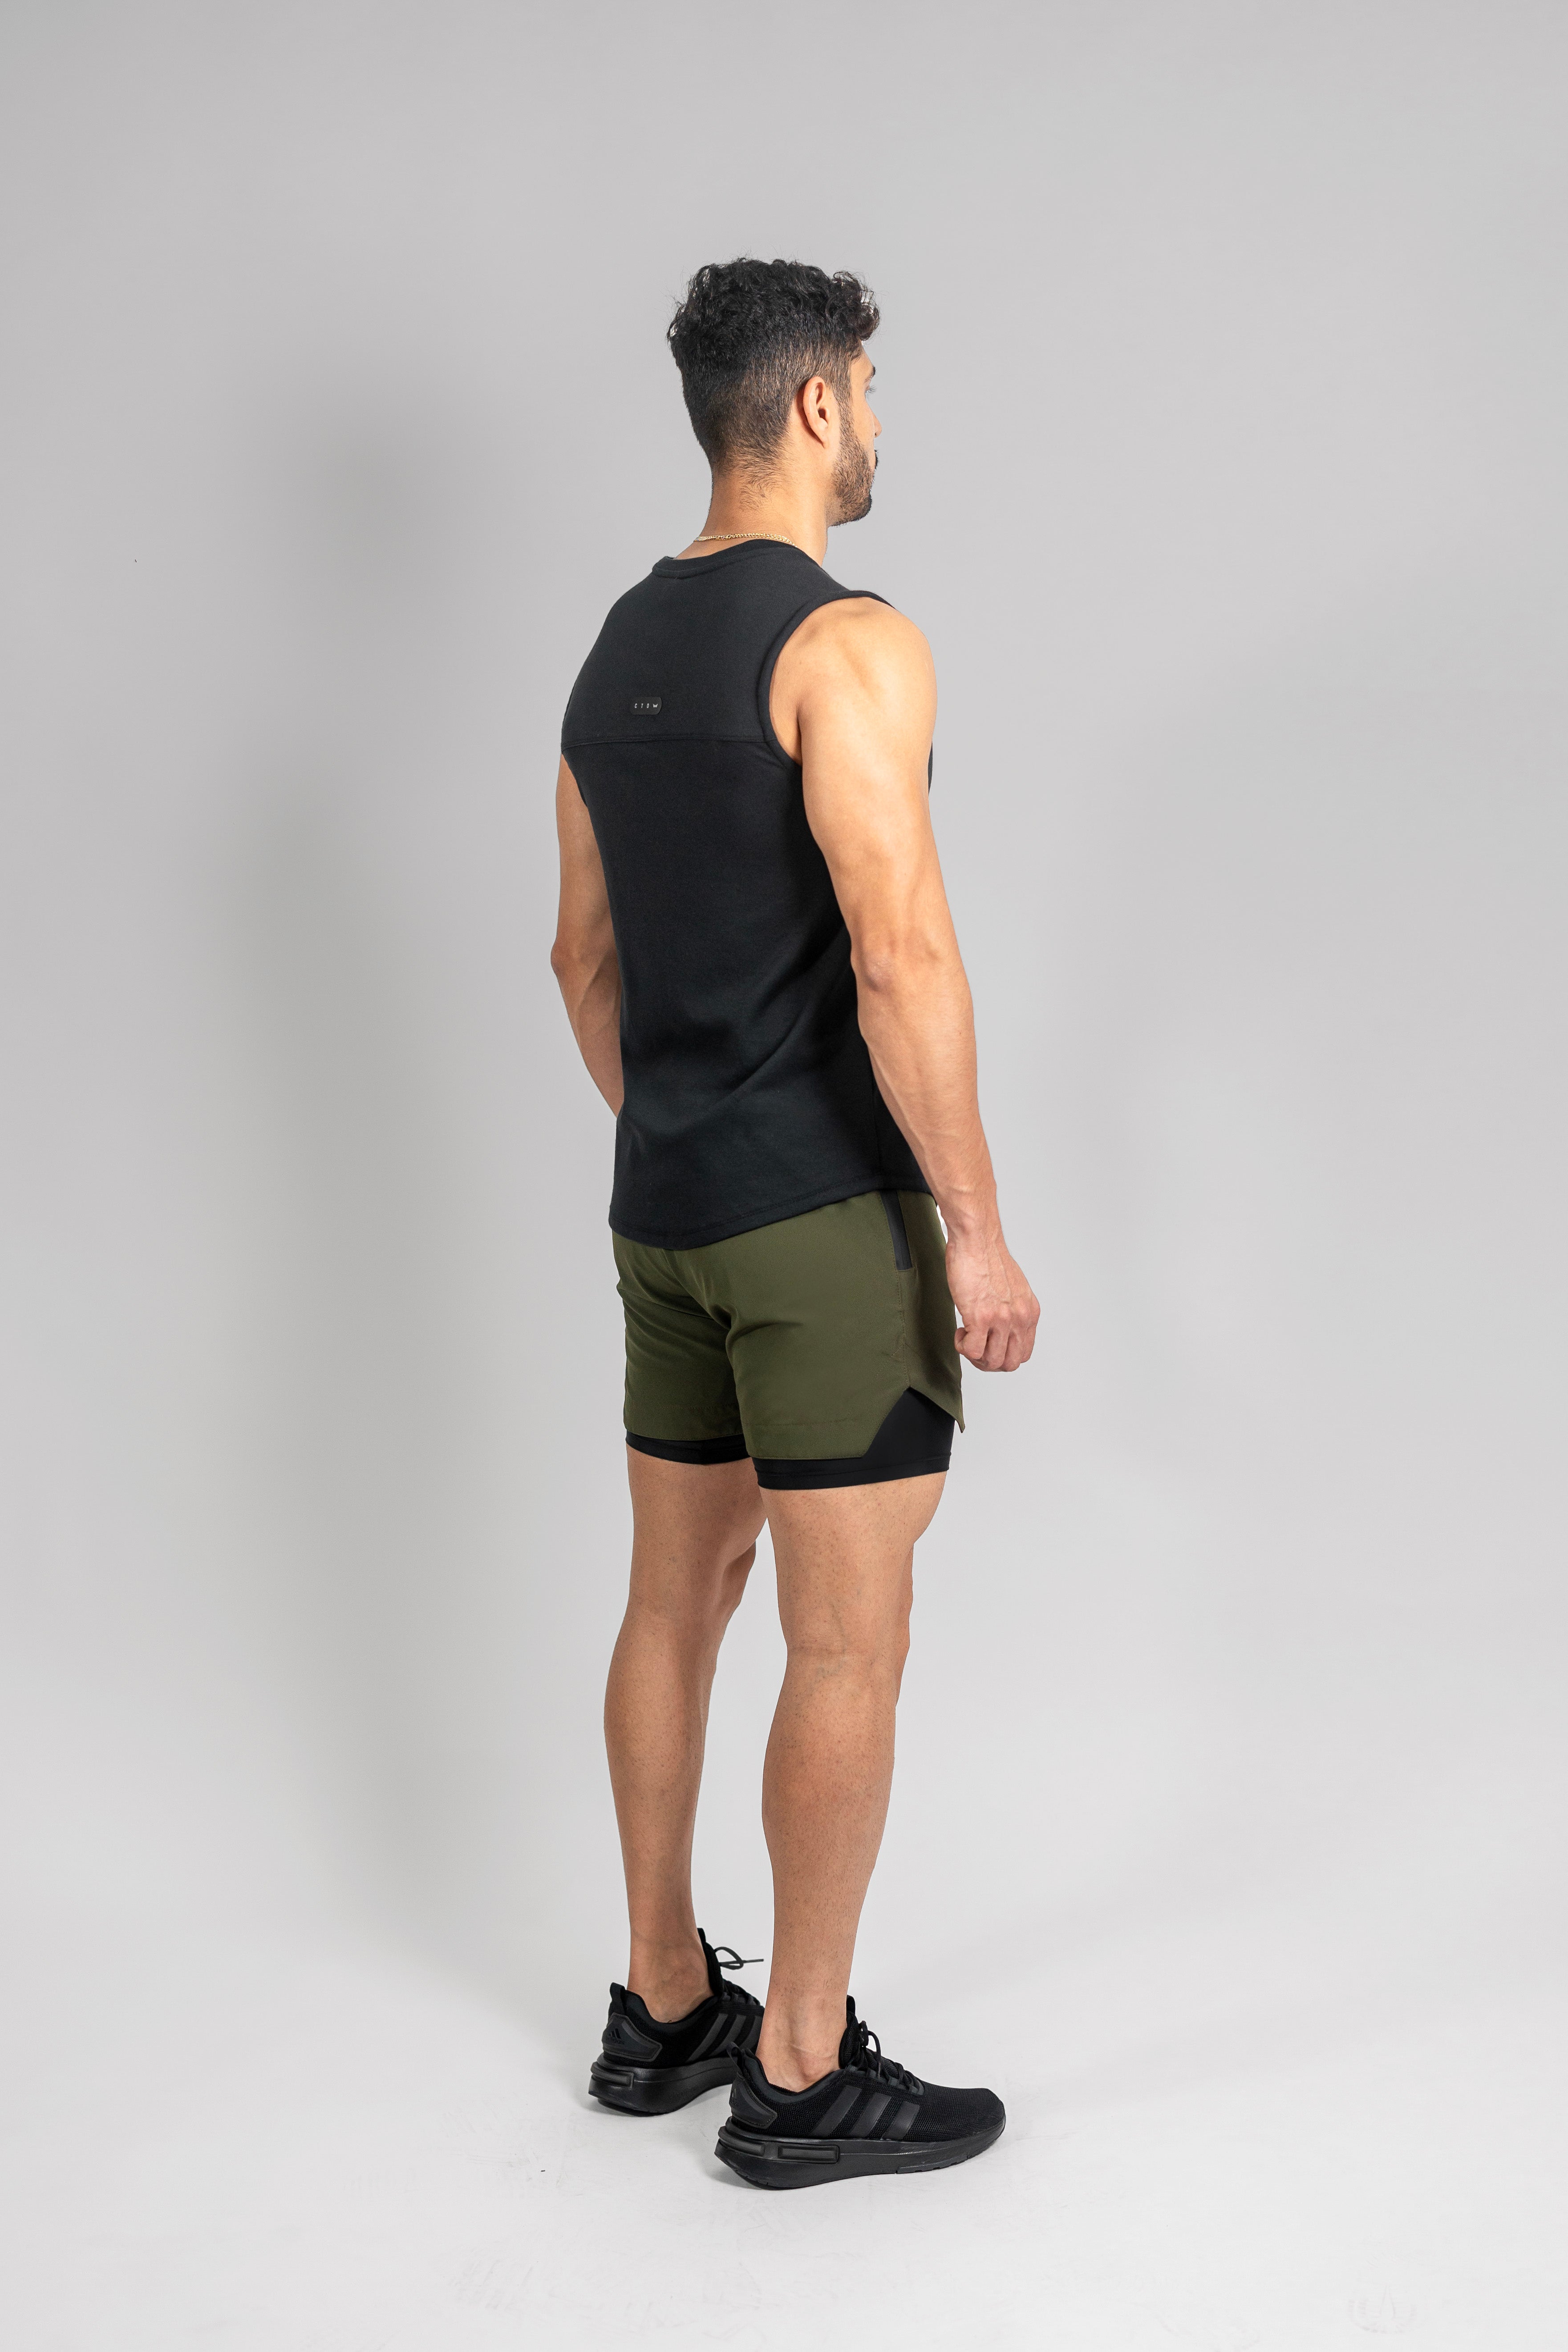 Performance Shorts 4.0 - Army Green